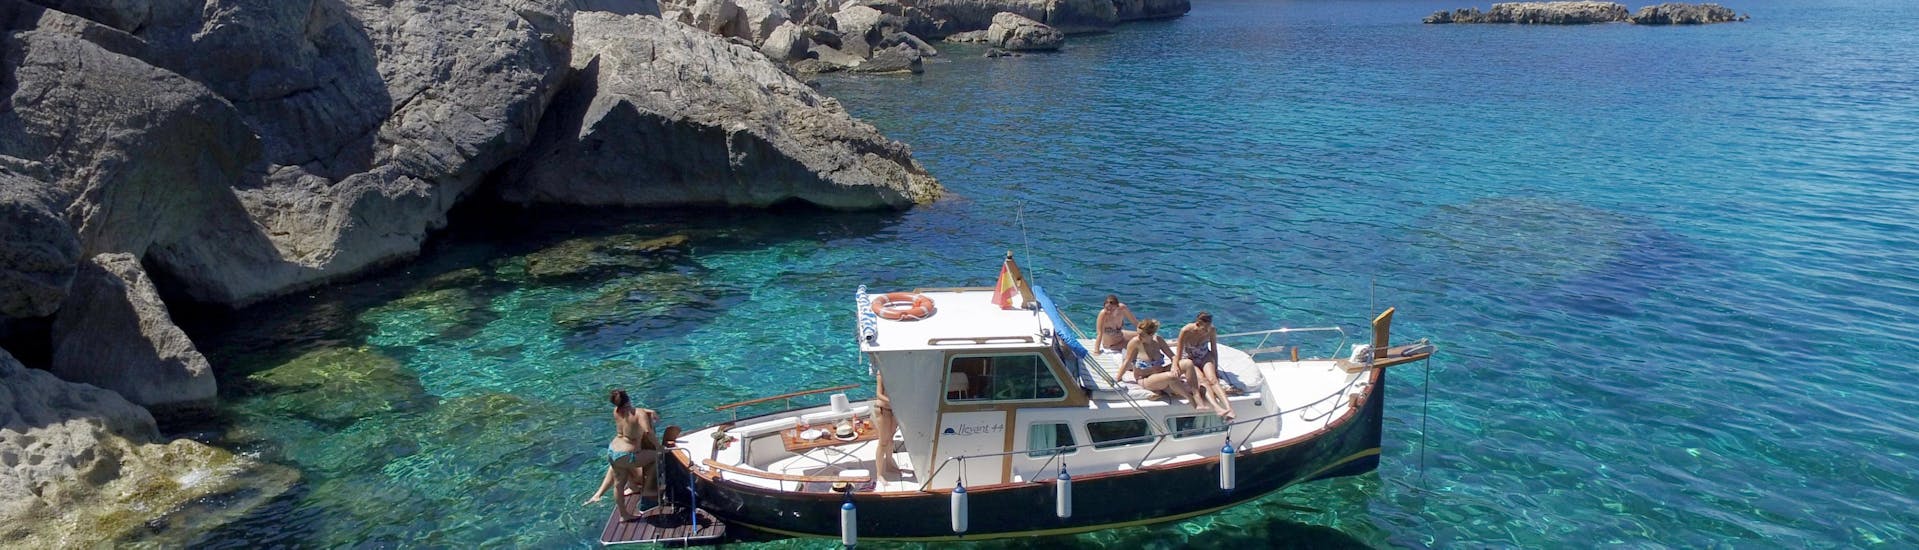 A boat from Take Off Ibiza is floating in the crystal clear waters during a private boat trip along the coast of Ibiza.